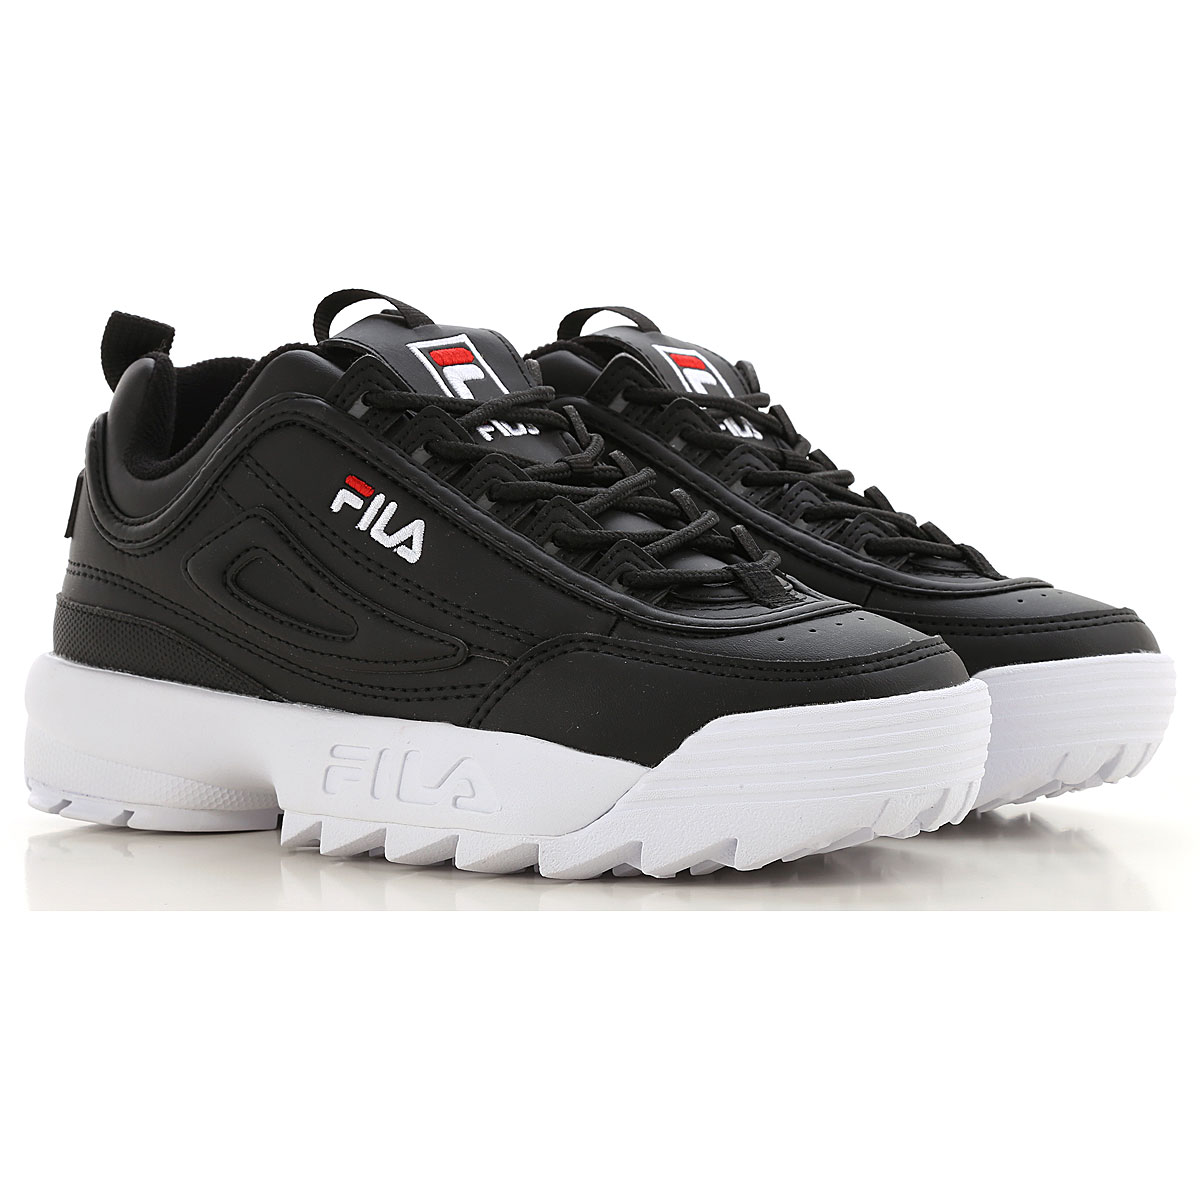 Womens Shoes  Fila  Style code 1010302 25y 